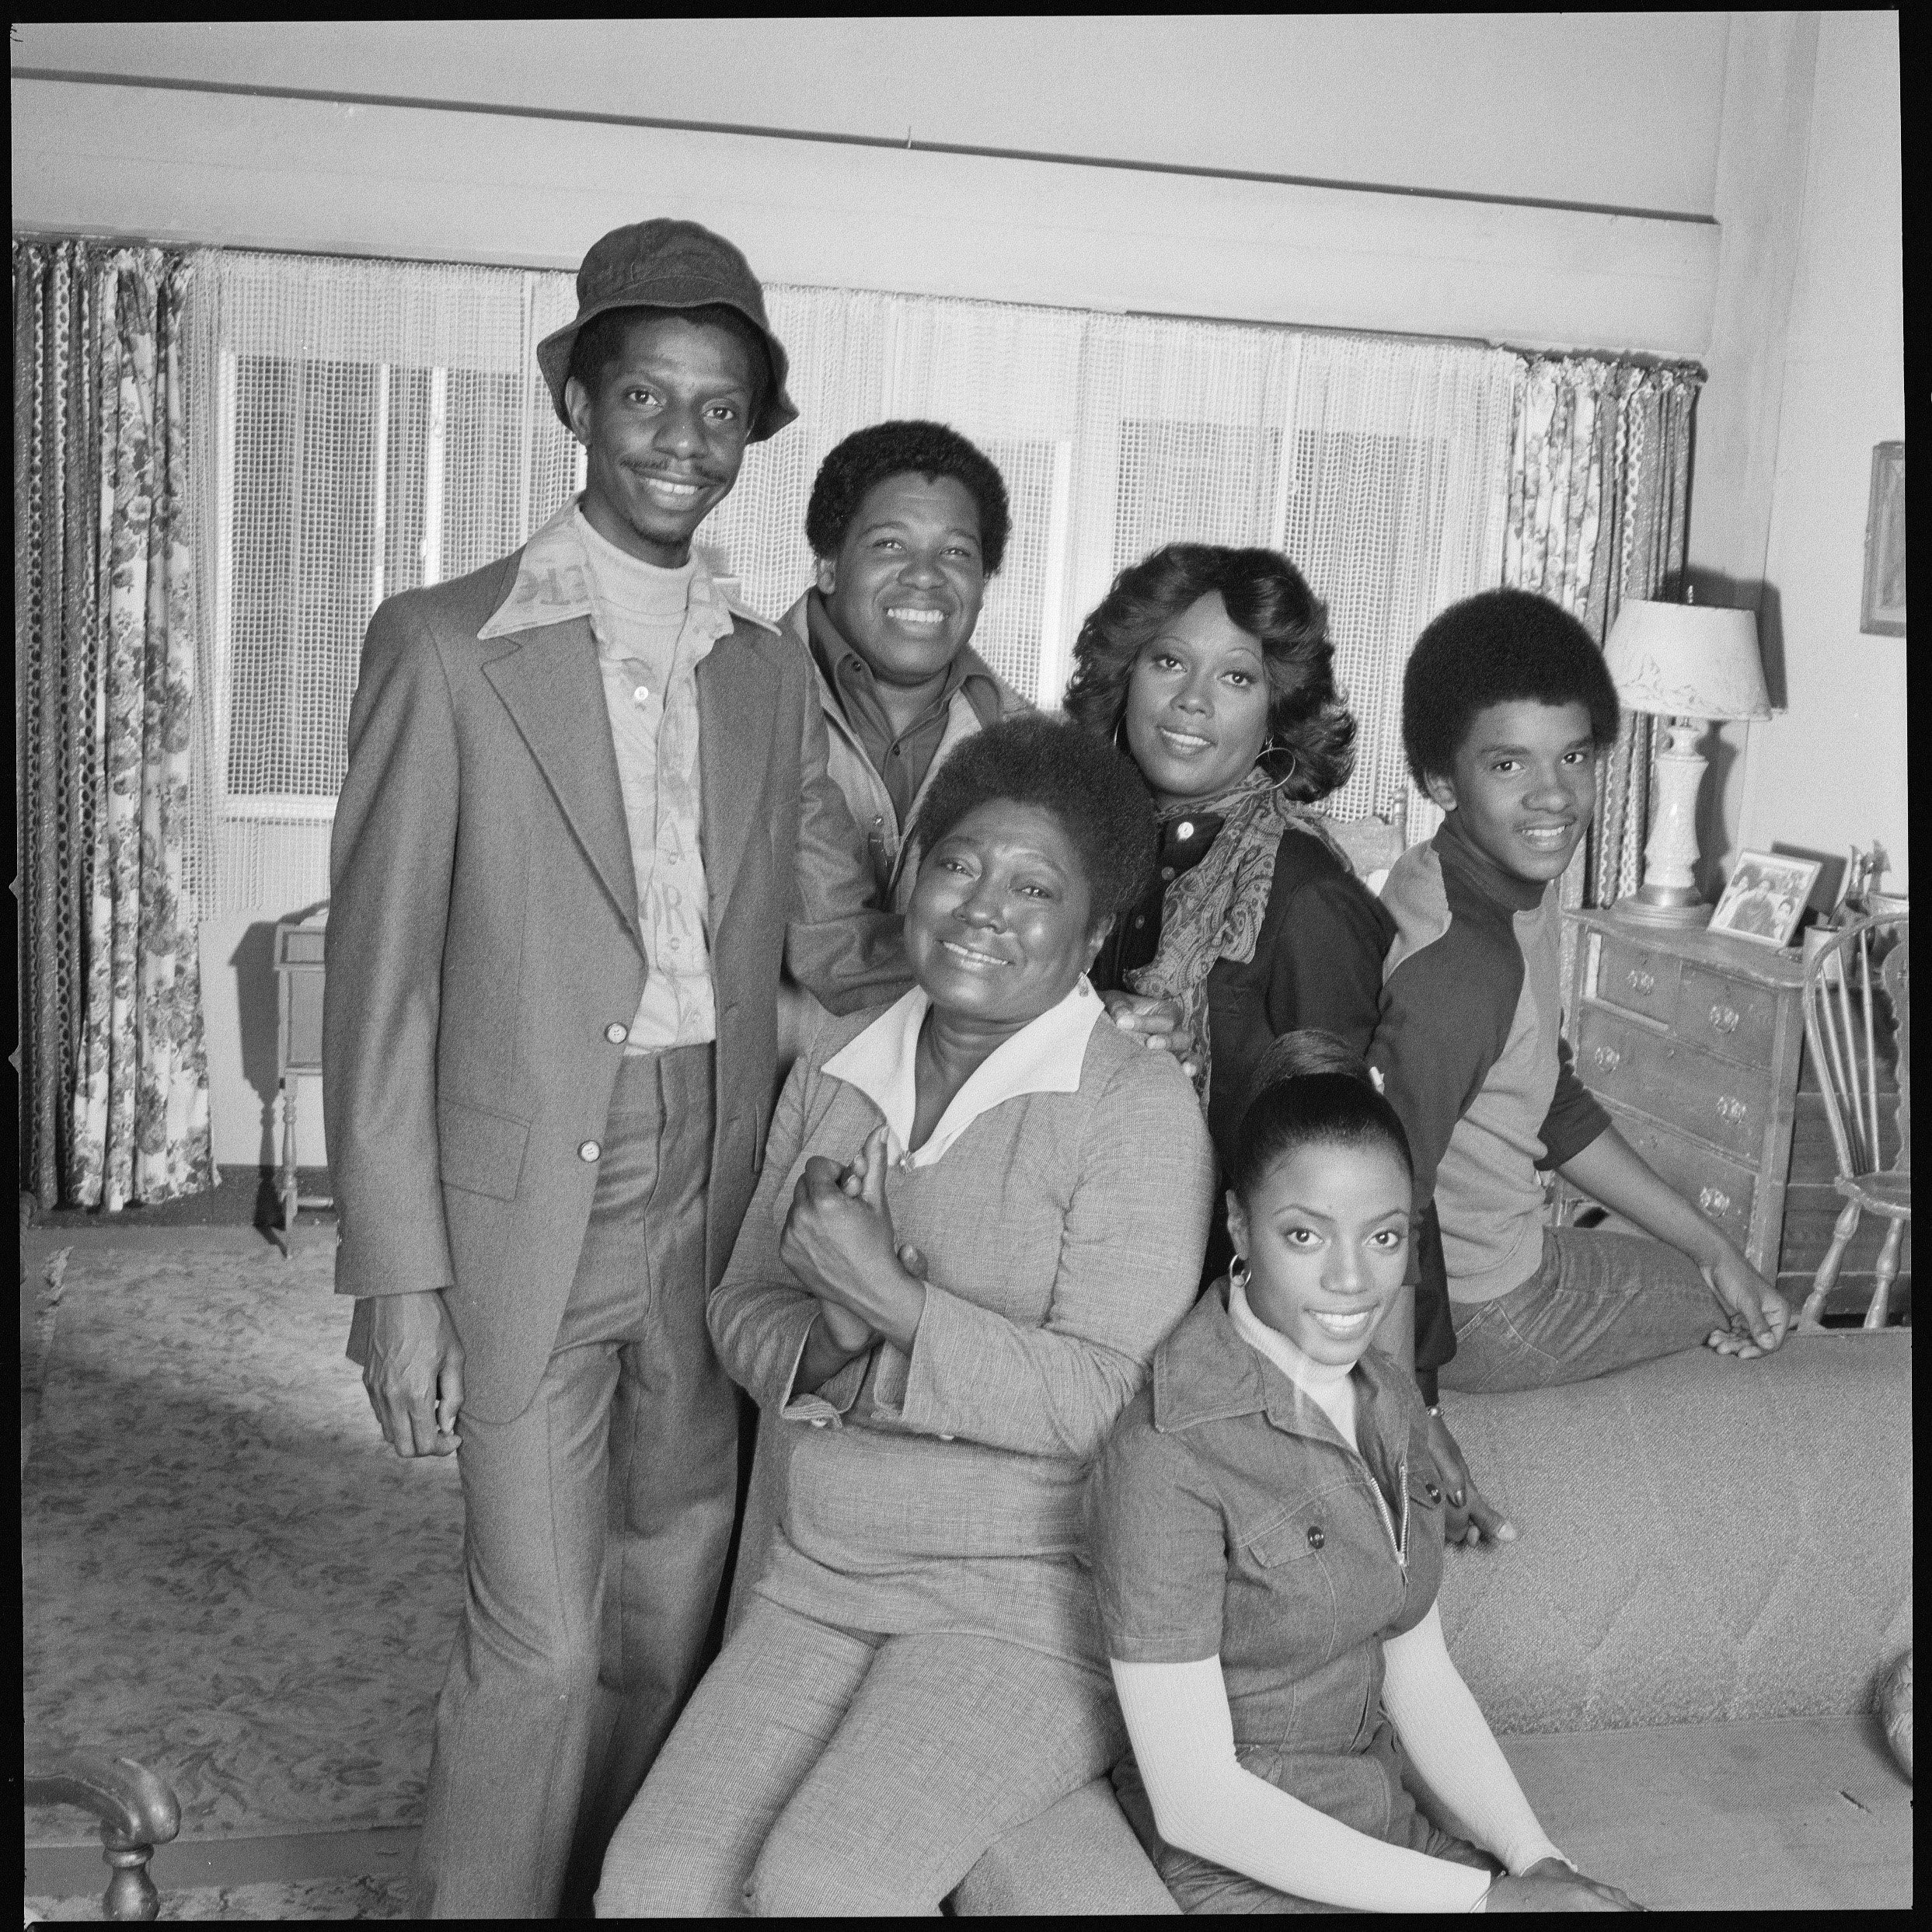 Esther Rolle and BernNadette Stanis; back row, from left, Jimmie Walker, Johnny Brown, Ja'net DuBois, and Ralph Carter on 'Good Times'